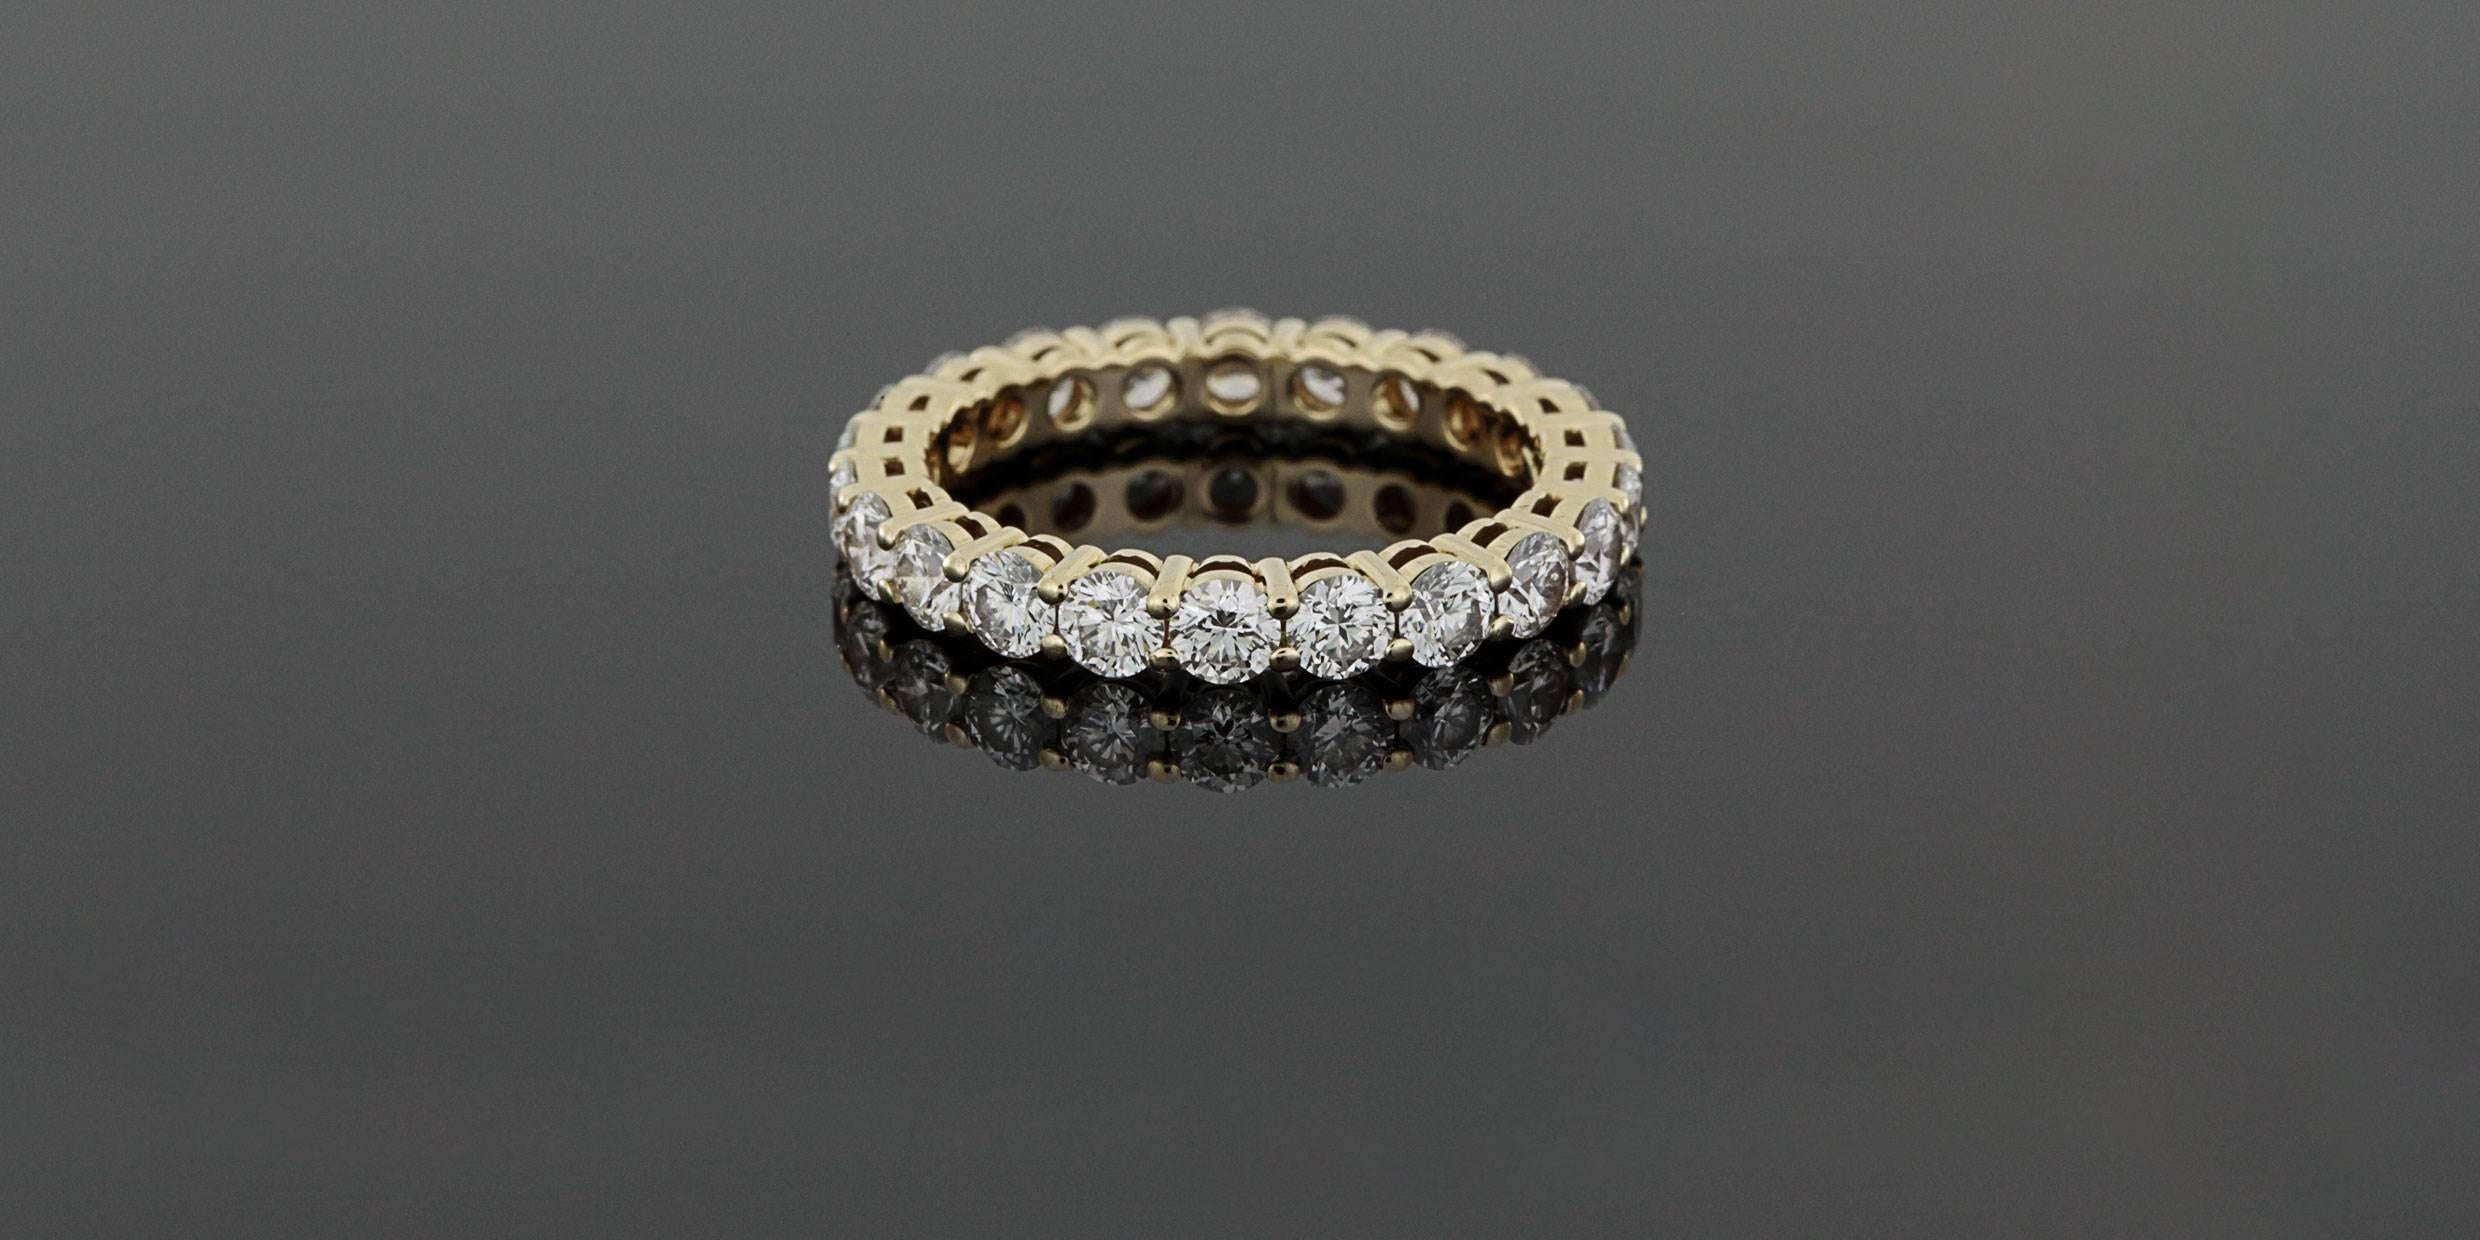 This gorgeous, classic band is from Tiffany & Co. It features 22 round brilliant cut diamonds that have a combined total weight of 1.76 carat & grade as G/VS2-SI1 in quality. The diamonds are shared prong set in a beautiful 18 karat yellow gold